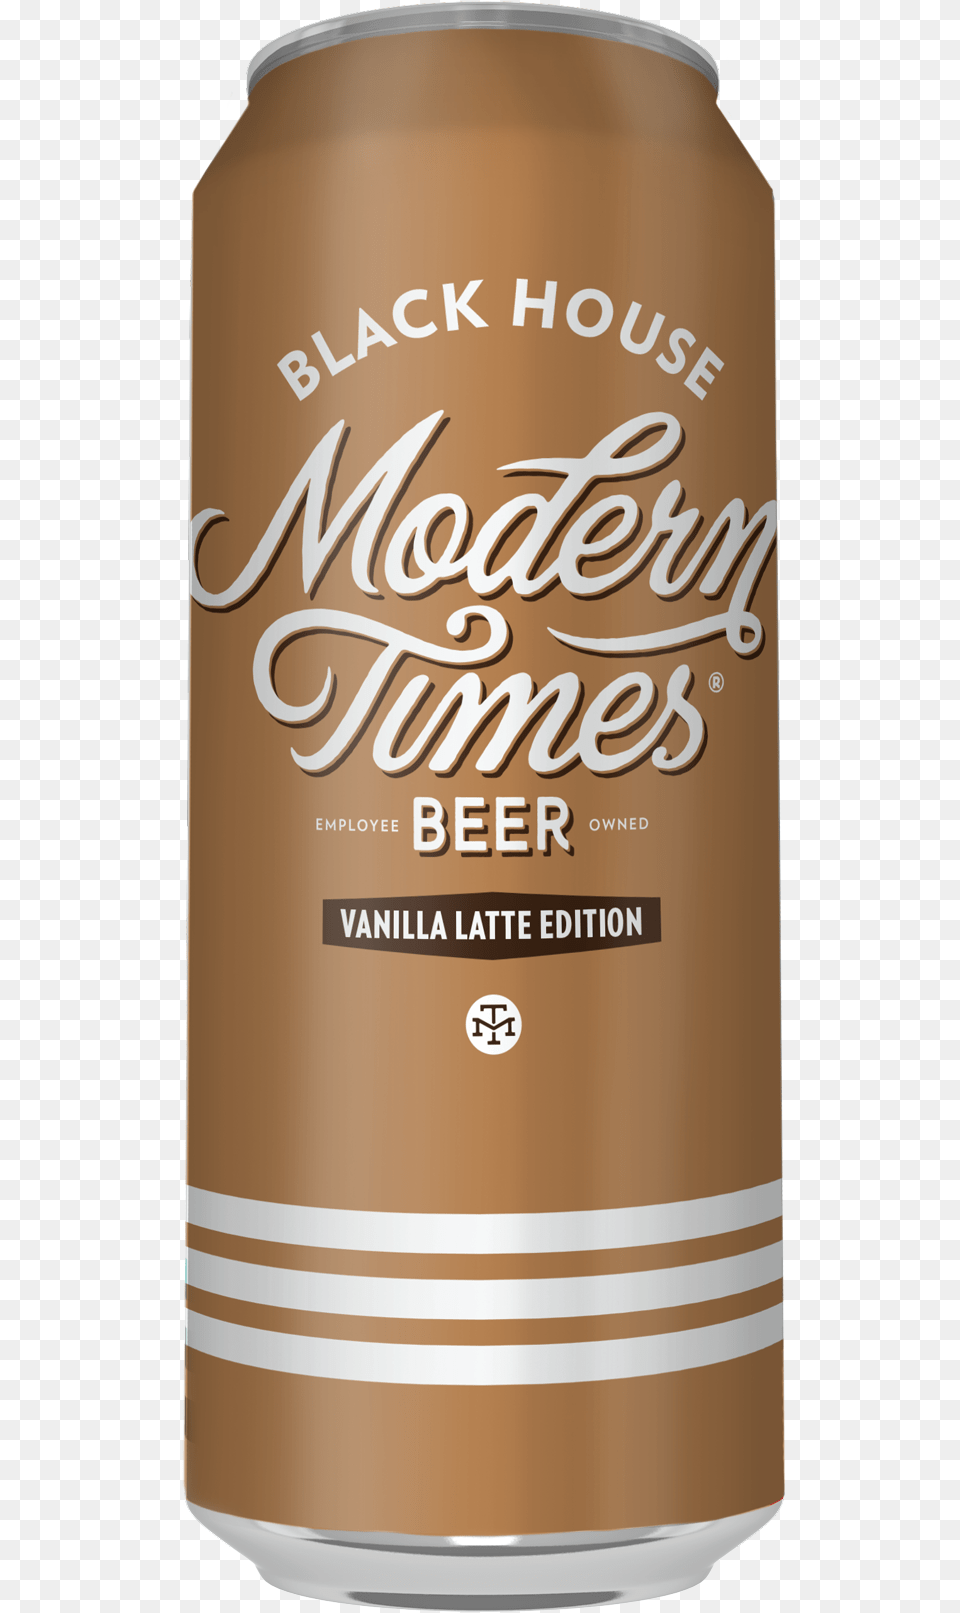 Black House Vanilla Latte Can Guinness, Alcohol, Beer, Beverage, Lager Png